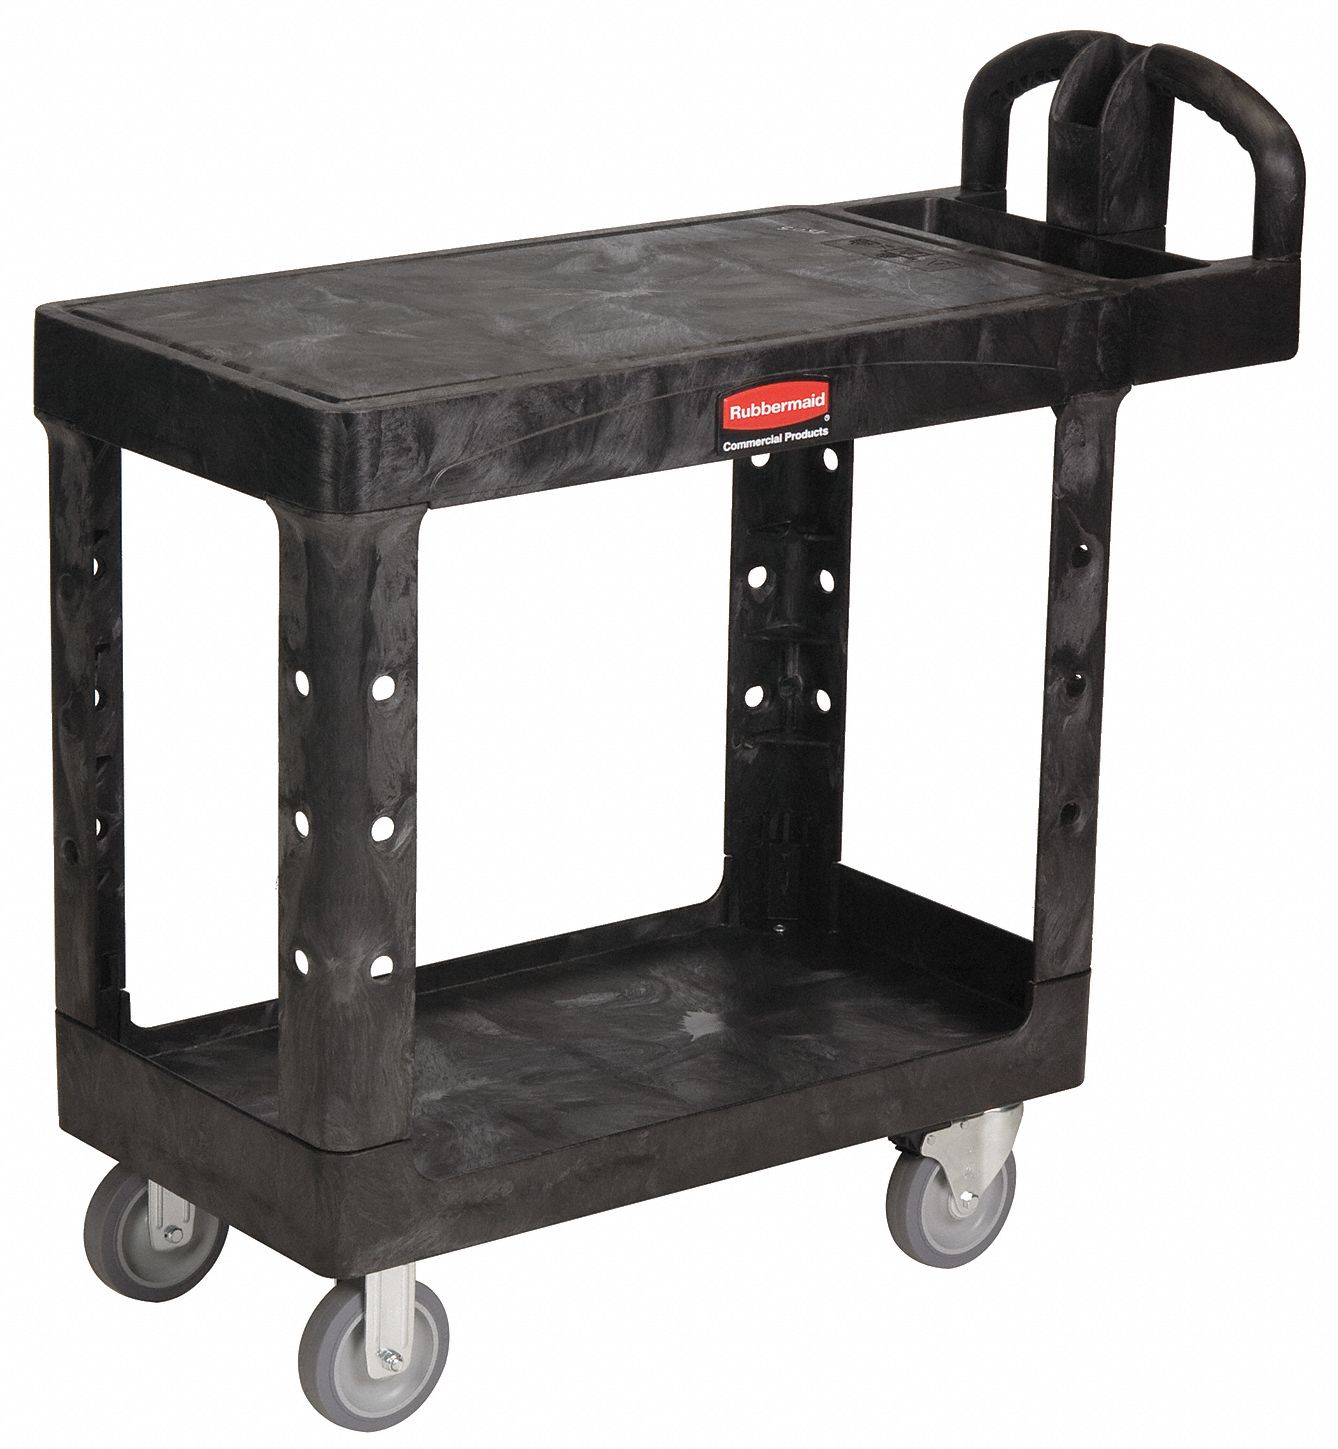 Black Medium 2-Shelf Lipped Shelves with Casters Rubbermaid Commercial Products FG452089BLA Heavy-Duty Utility Cart 